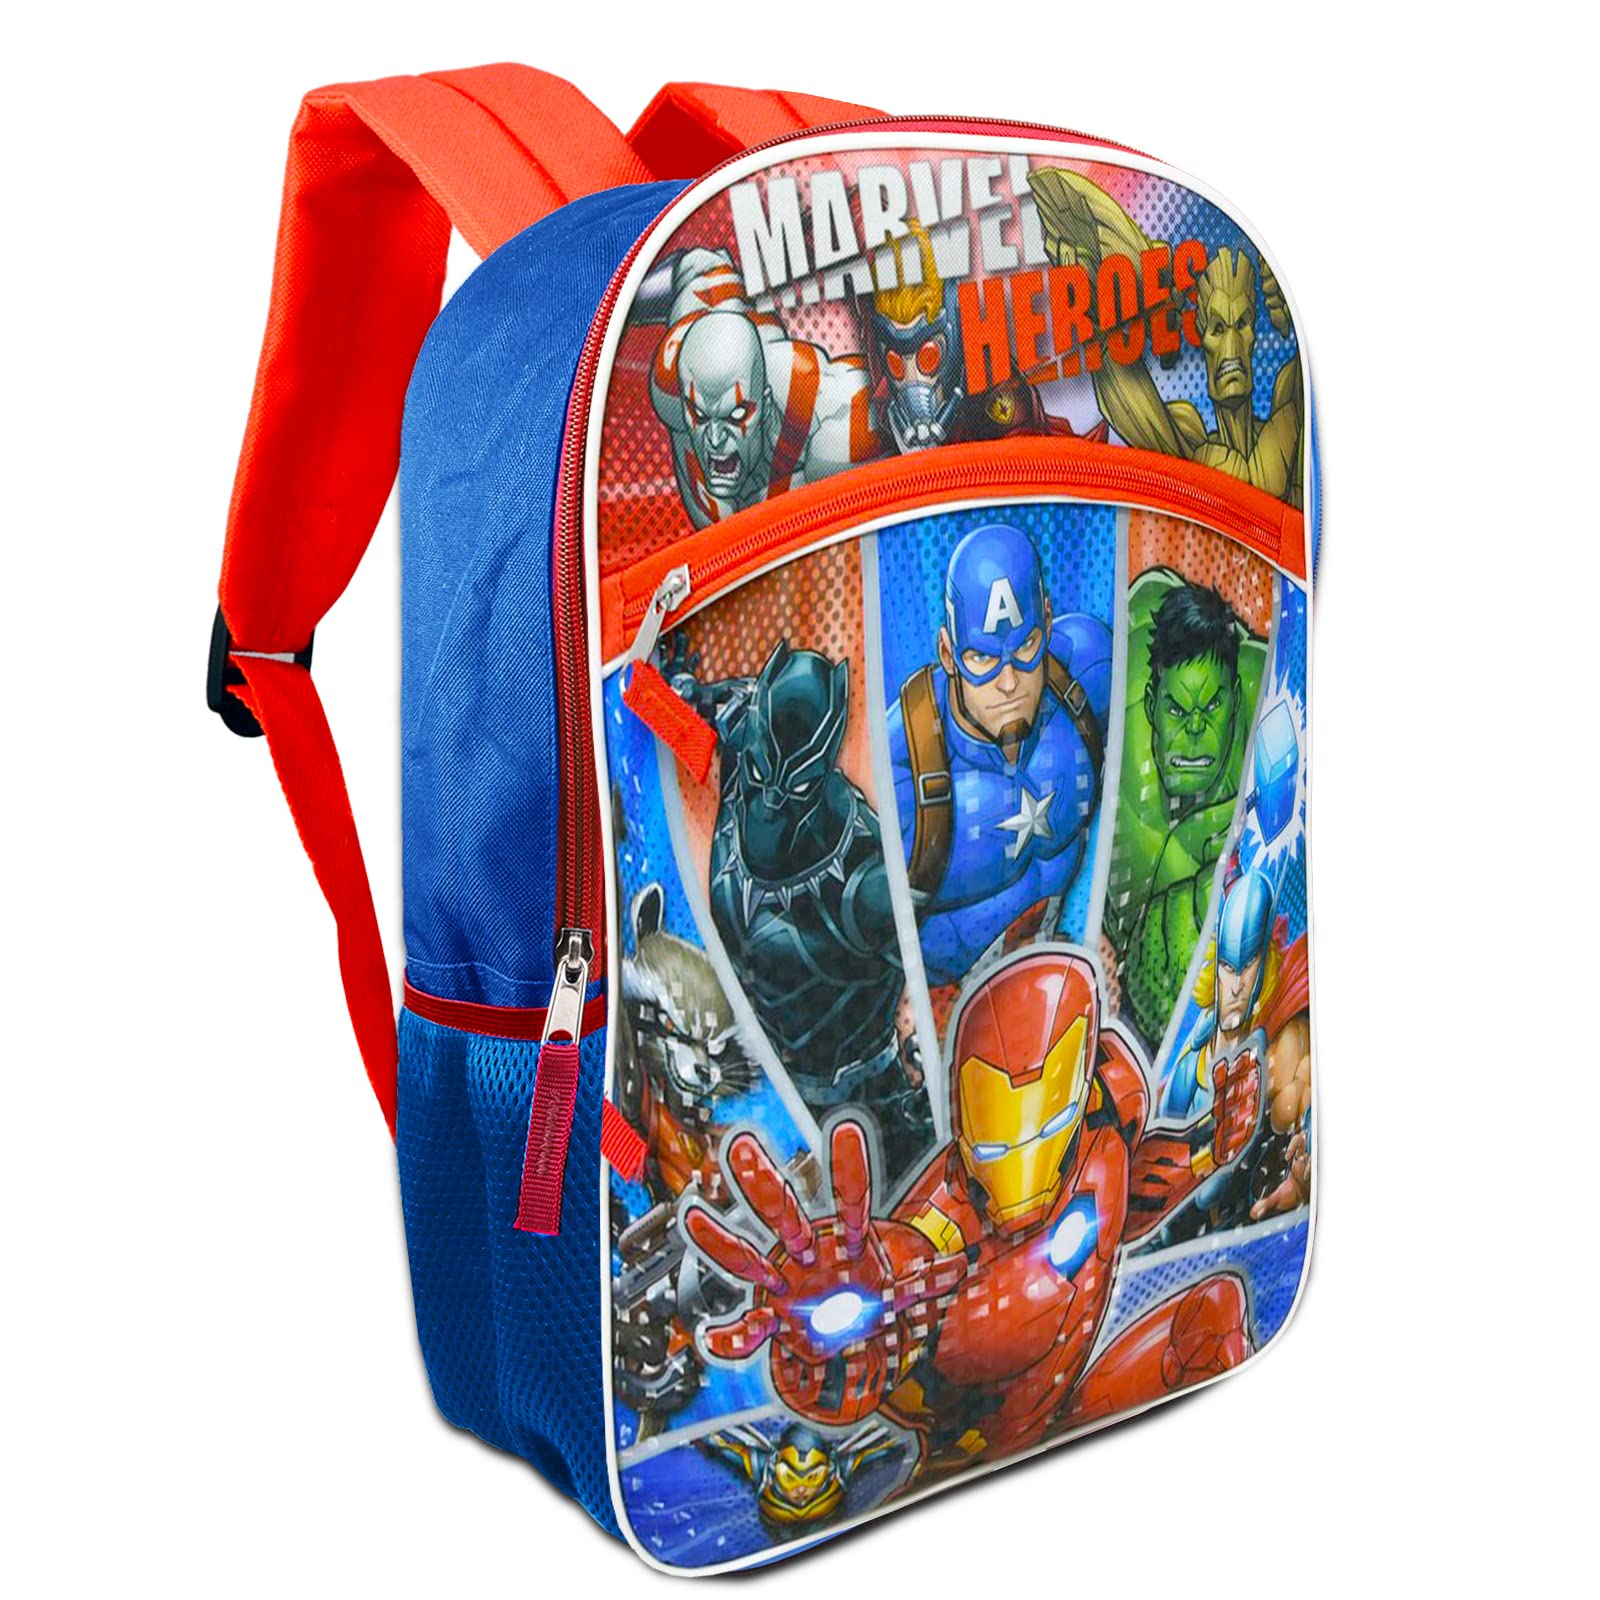 Avengers Backpack with Lunch Box Set - Avengers Backpack for Boys 8-12 Bundle with Avengers Backpack, Avengers Lunch Box, Stickers, More | Avengers School Backpack